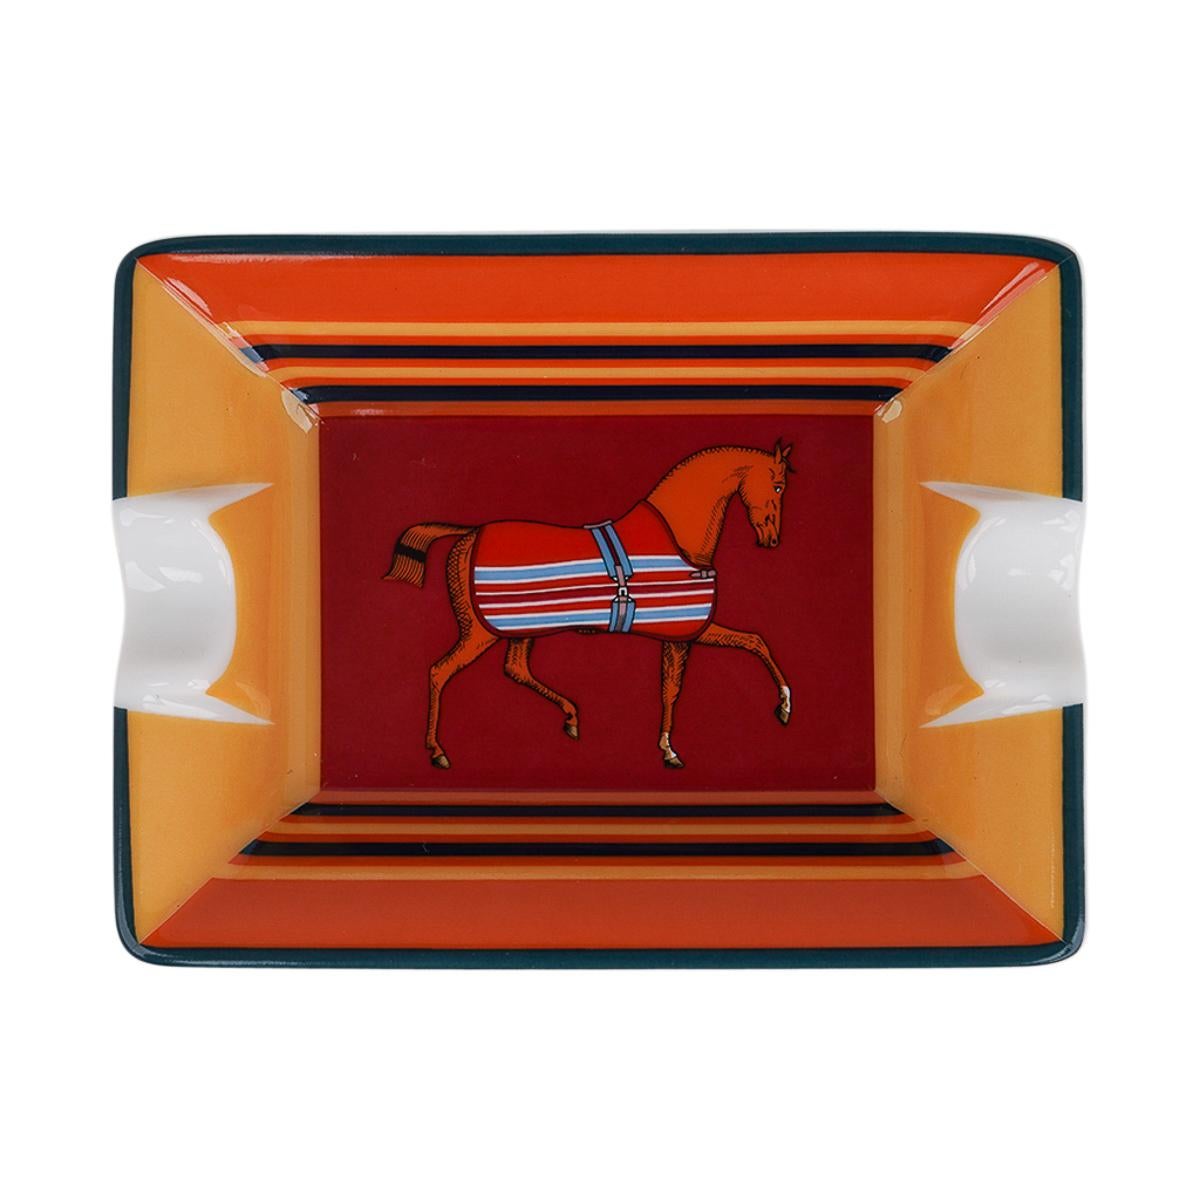 Mightychic offers Hermes Rocabar a Cheval set of two
( 2 ) mini ashtrays.
Rouge H and Terracotta colorway.
A perfect accent piece for any room.
Protected by a velvet goatskin base.
Wonderful for desk or gifting.
Comes with the signature Hermes